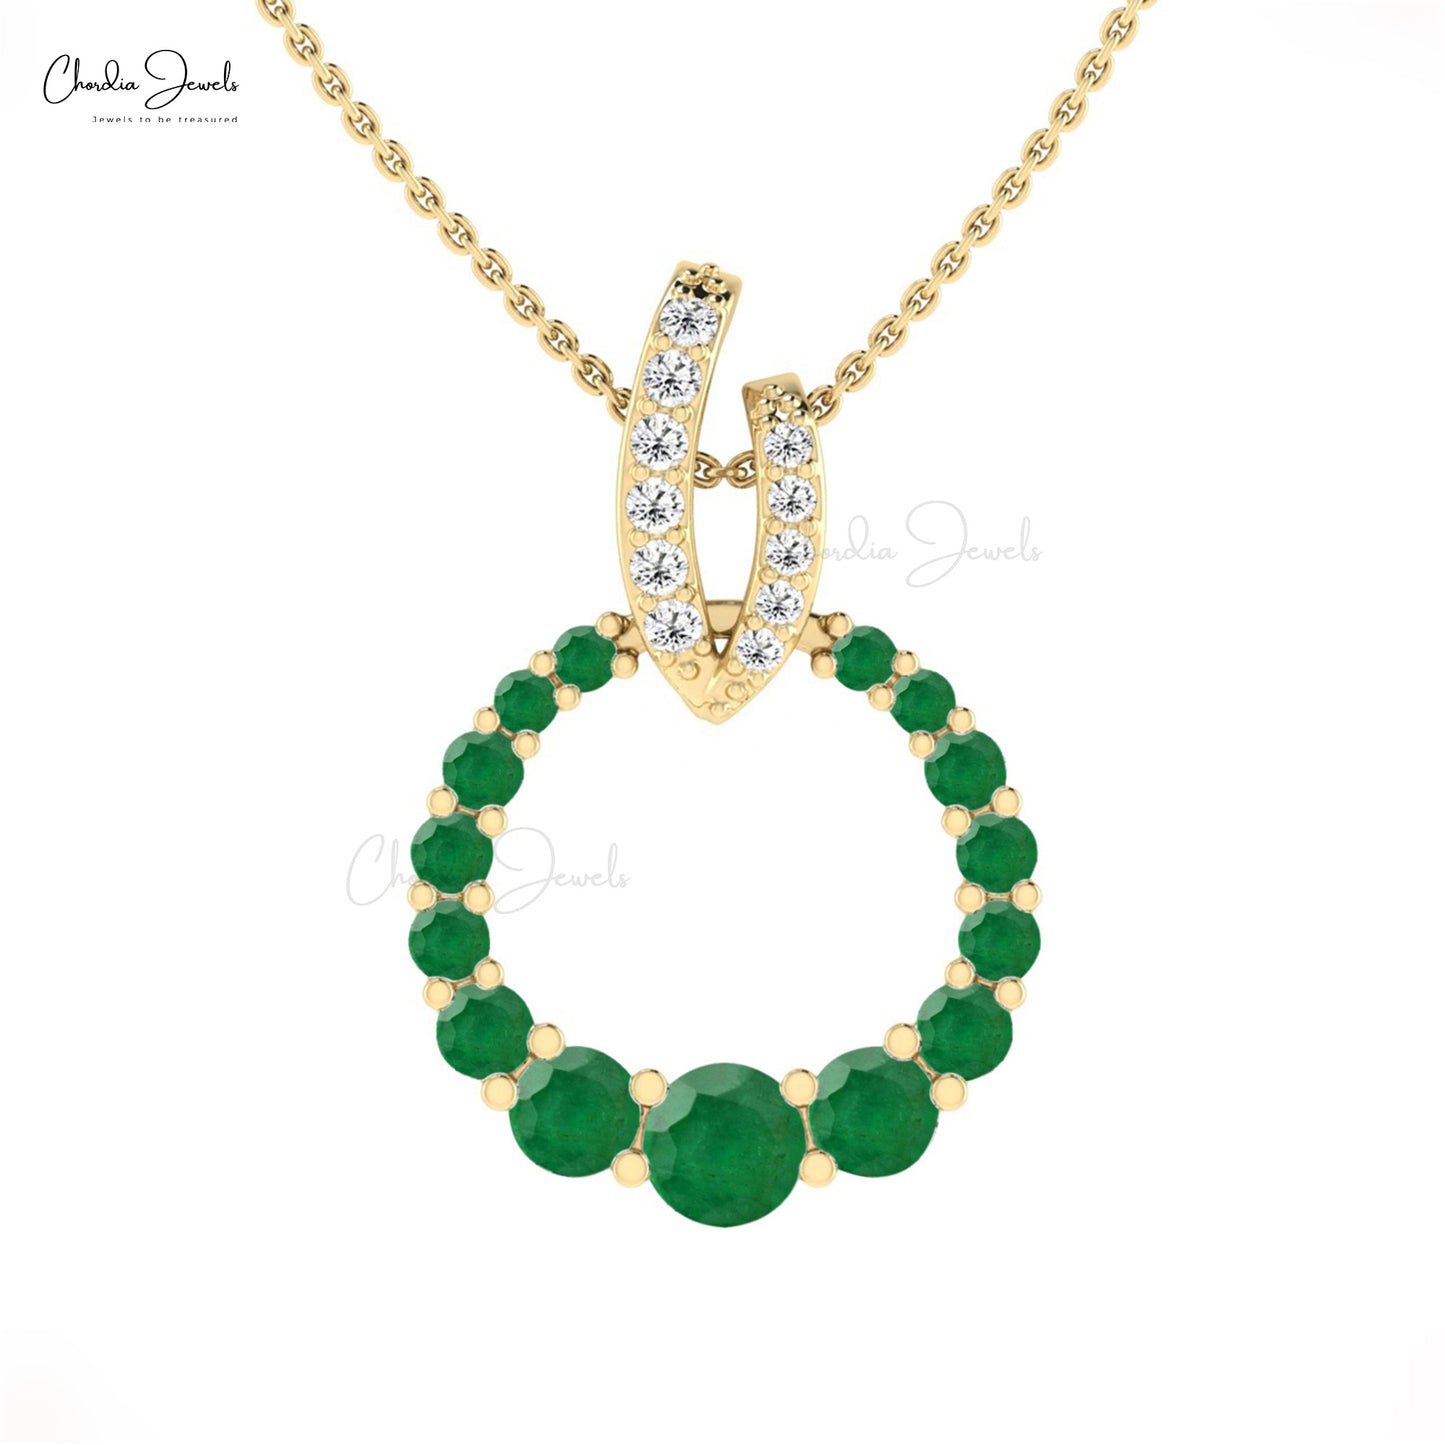 Circle Pendant With Emerald & Diamond Accents 14k Solid Gold Statement Pendant For Her